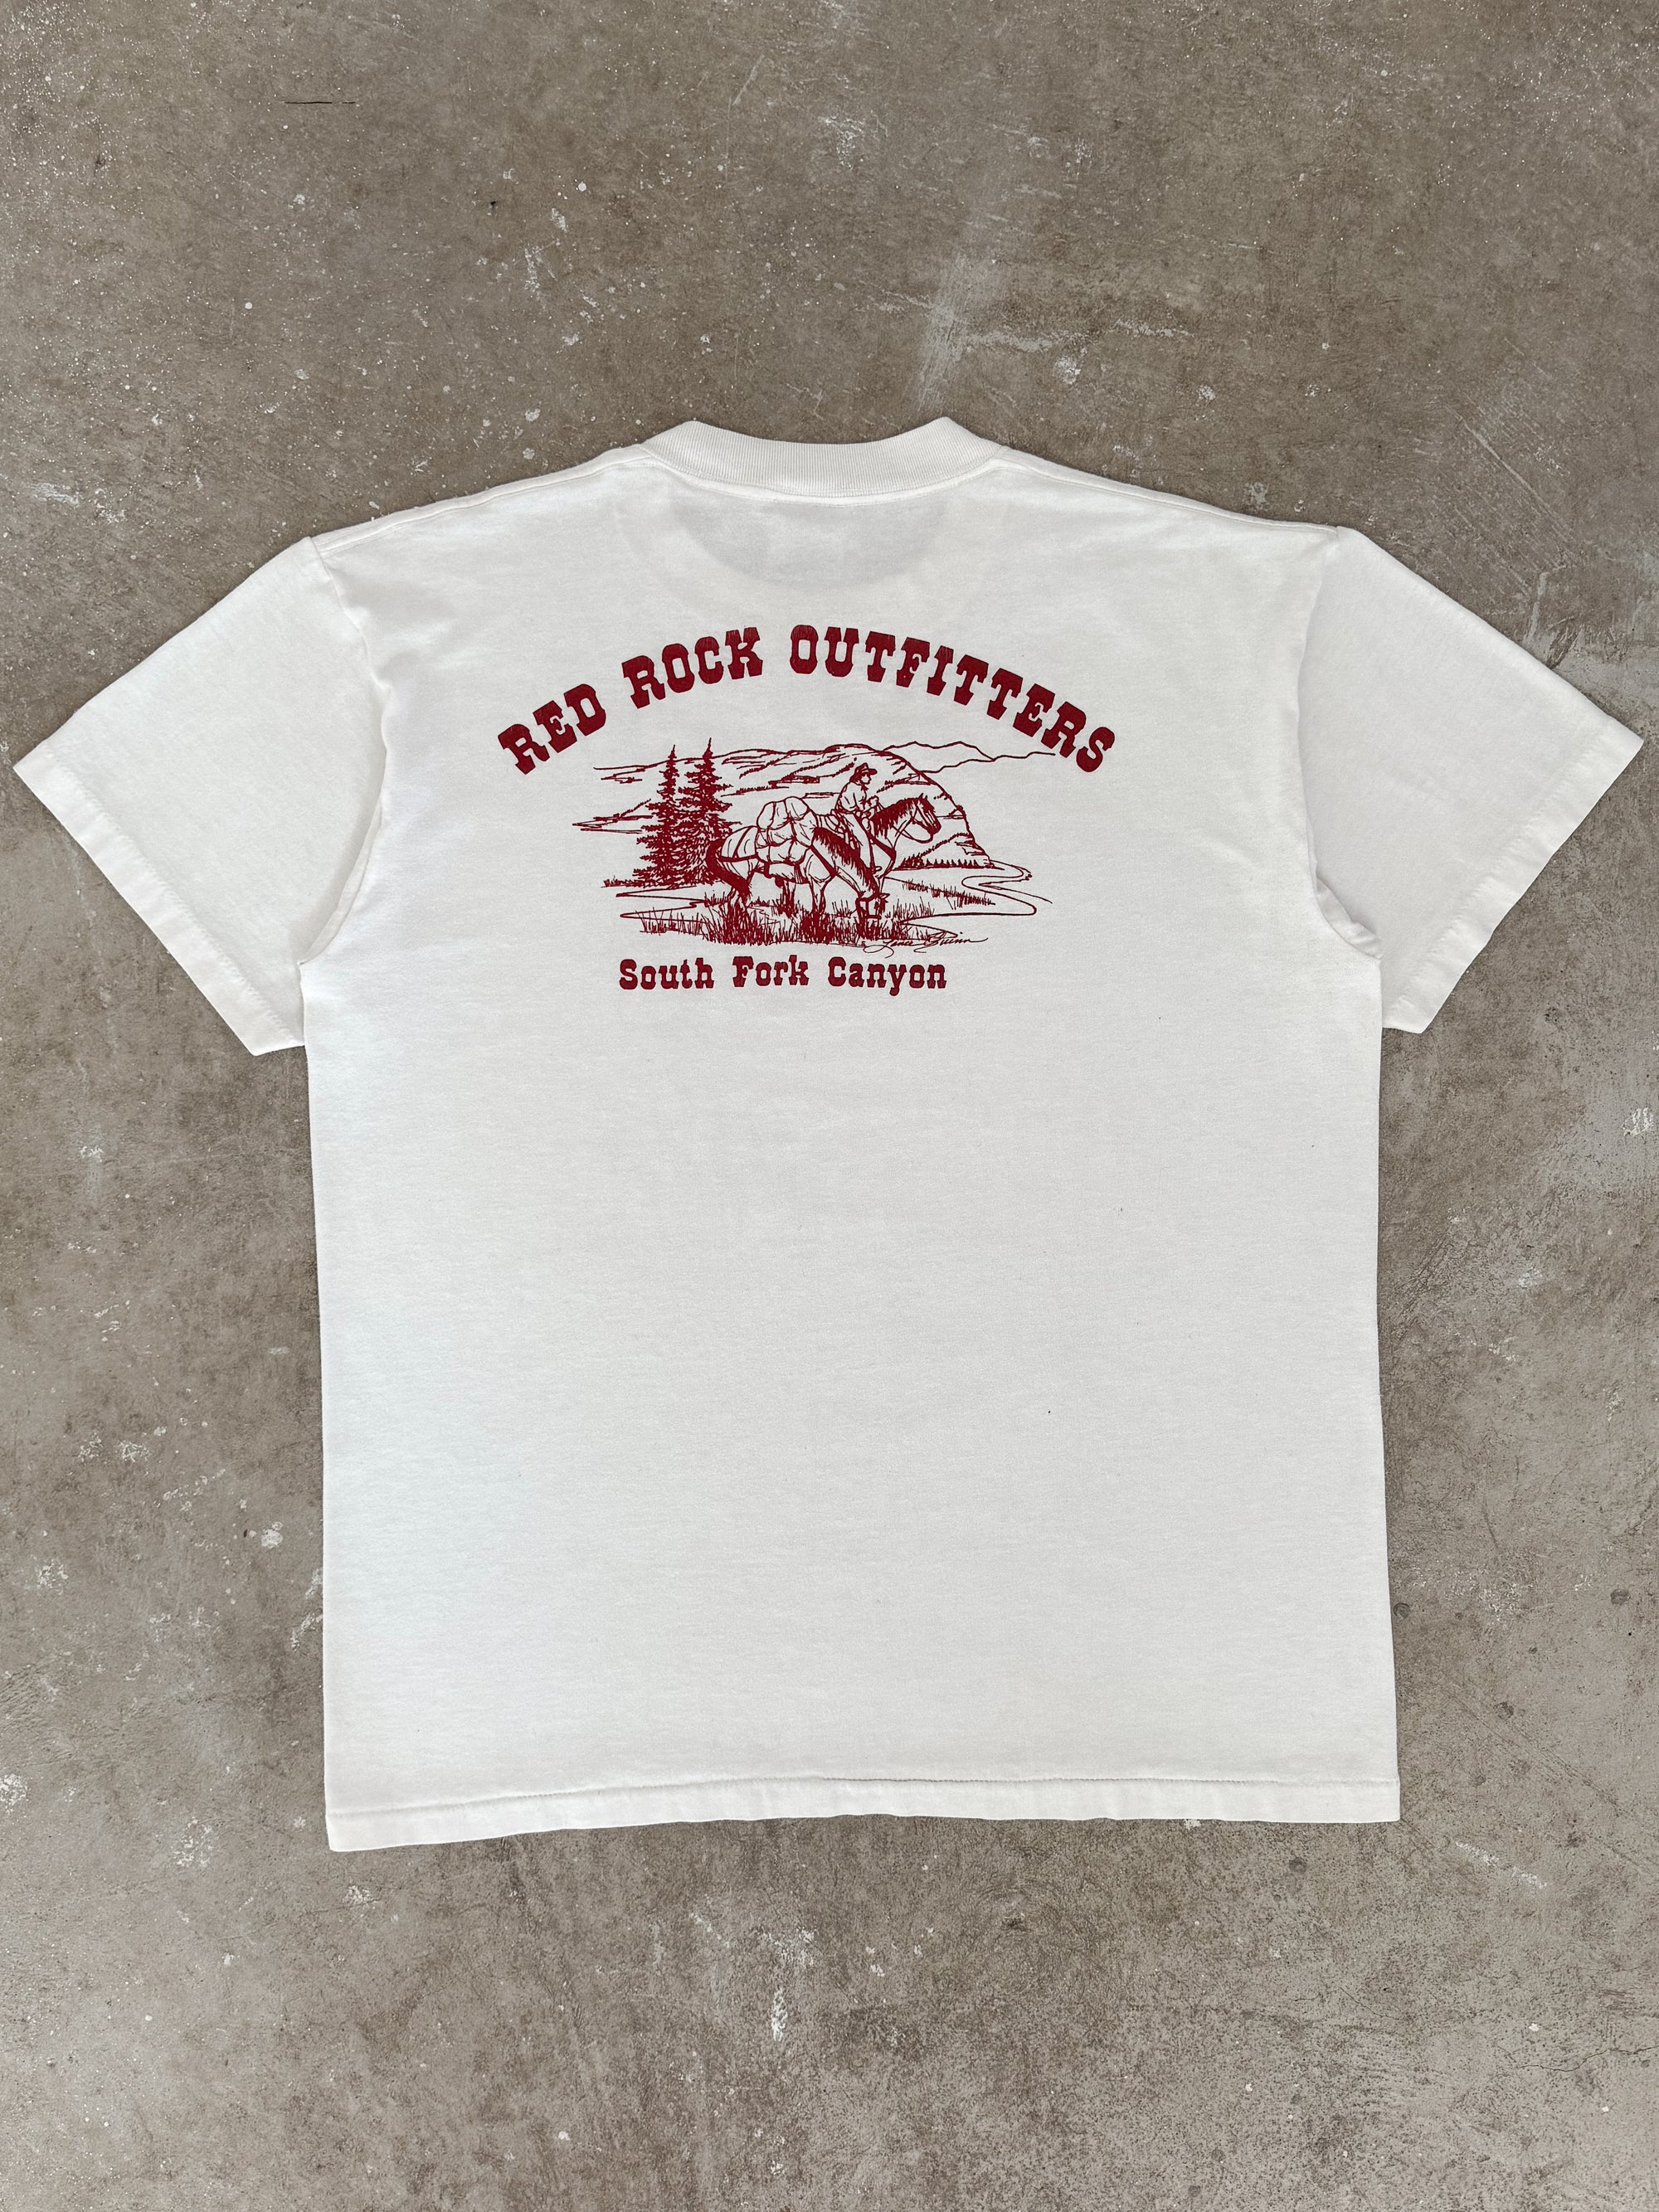 1990s "Red Rock Outfitters" Tee (L)